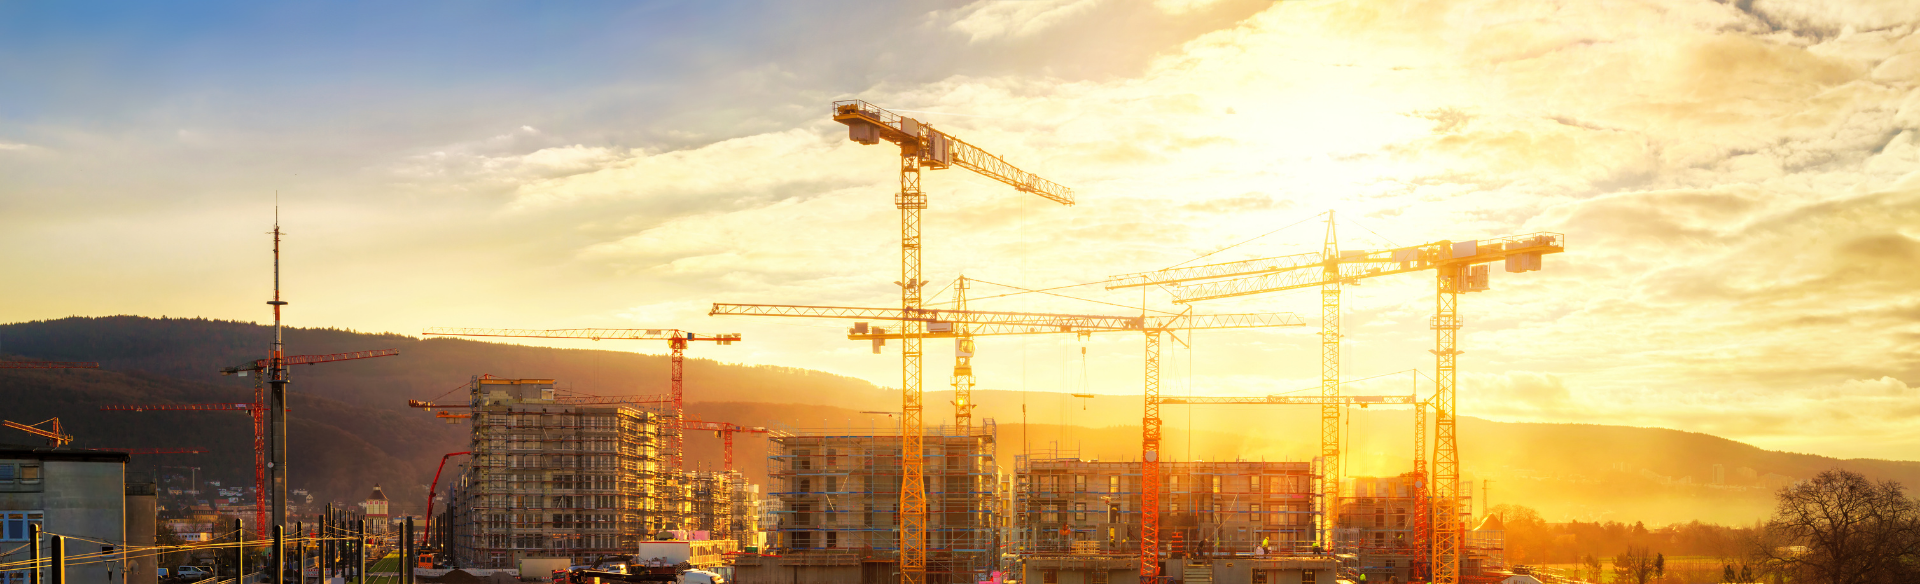 Could Offsite Construction Reduce Liabilities? Part 2 featured image